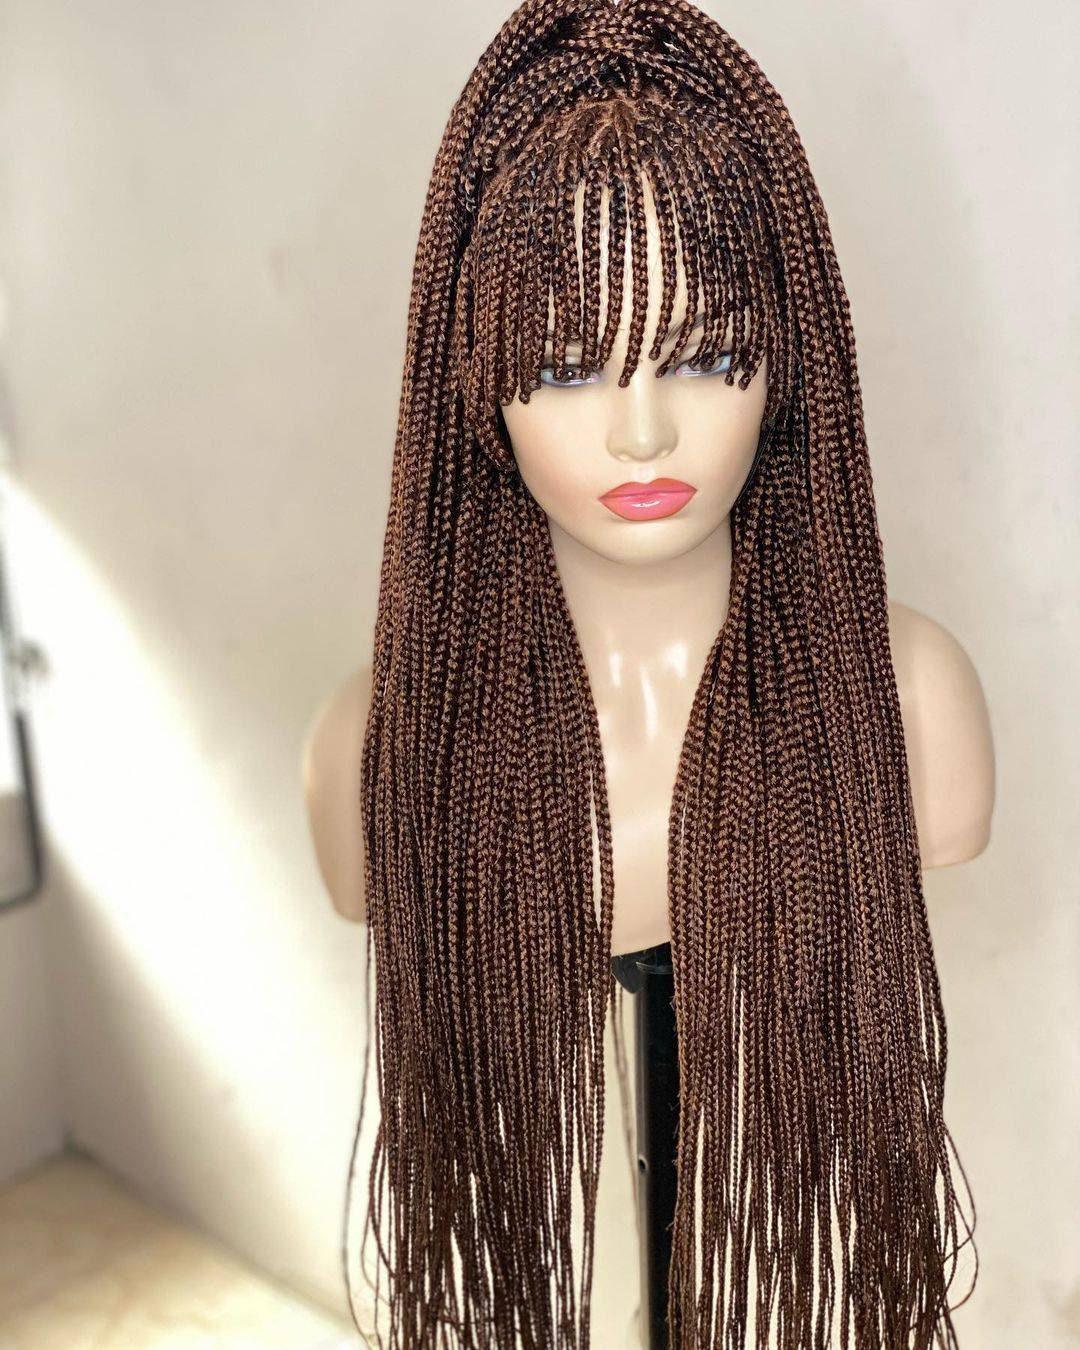 African Box Braid wigs with Bang made on a 13 by 6 Lace Front Wig Color 30, 30 Inches Long